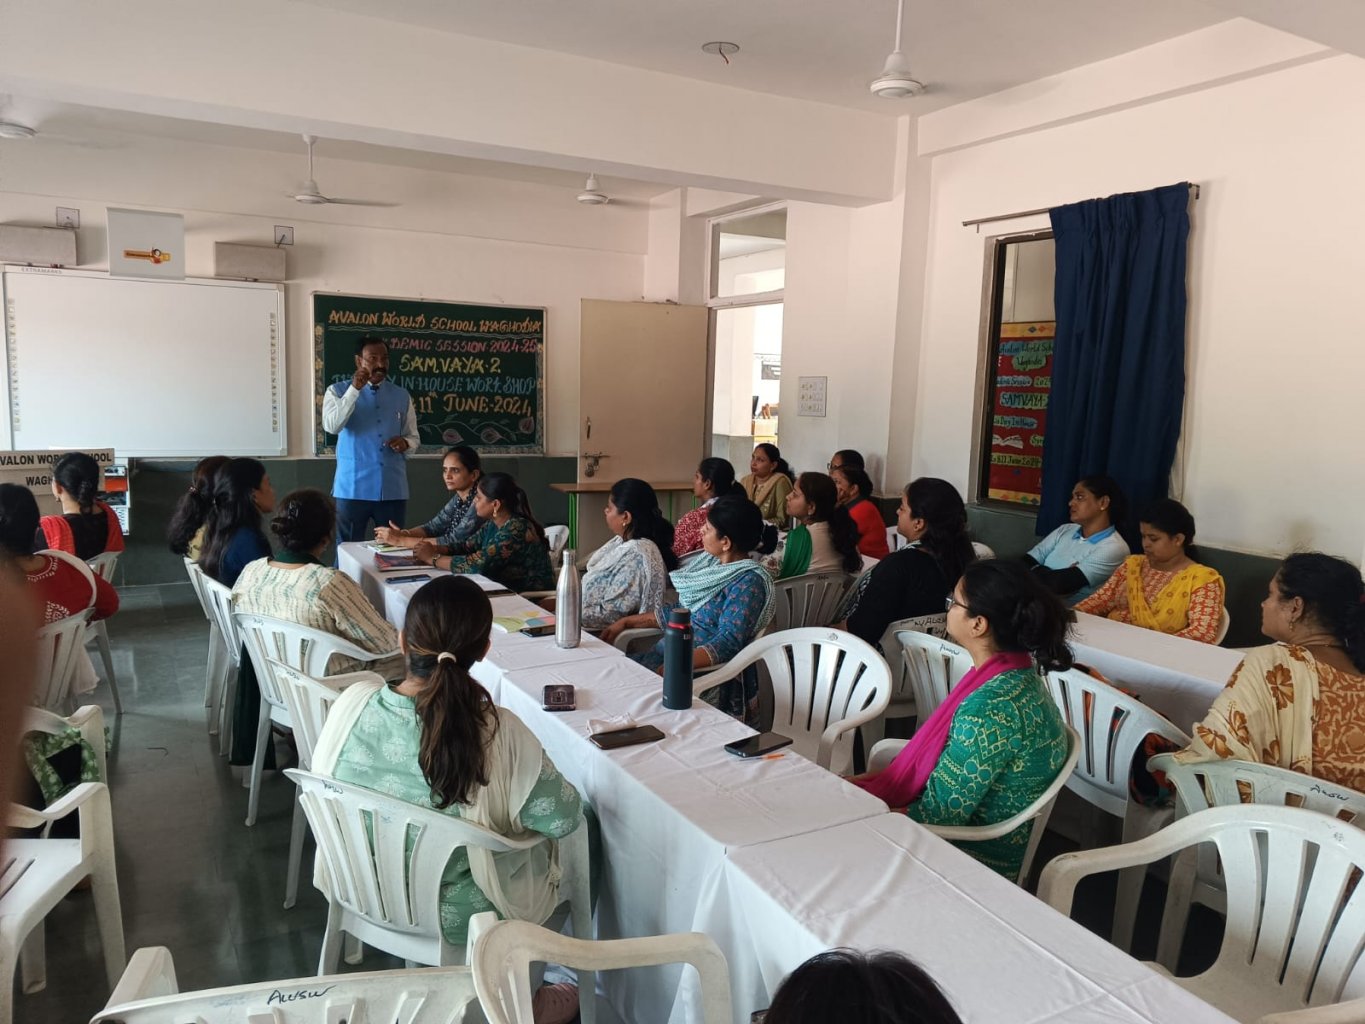 Samvaya-II, an in-house Symposium for two days was organised for the teachers of Avalon World School Waghodia and Dabhoi, in Avalon World School Waghodia on 10 & 11 June, with the purpose of learning, earning, savouring and conversing.  